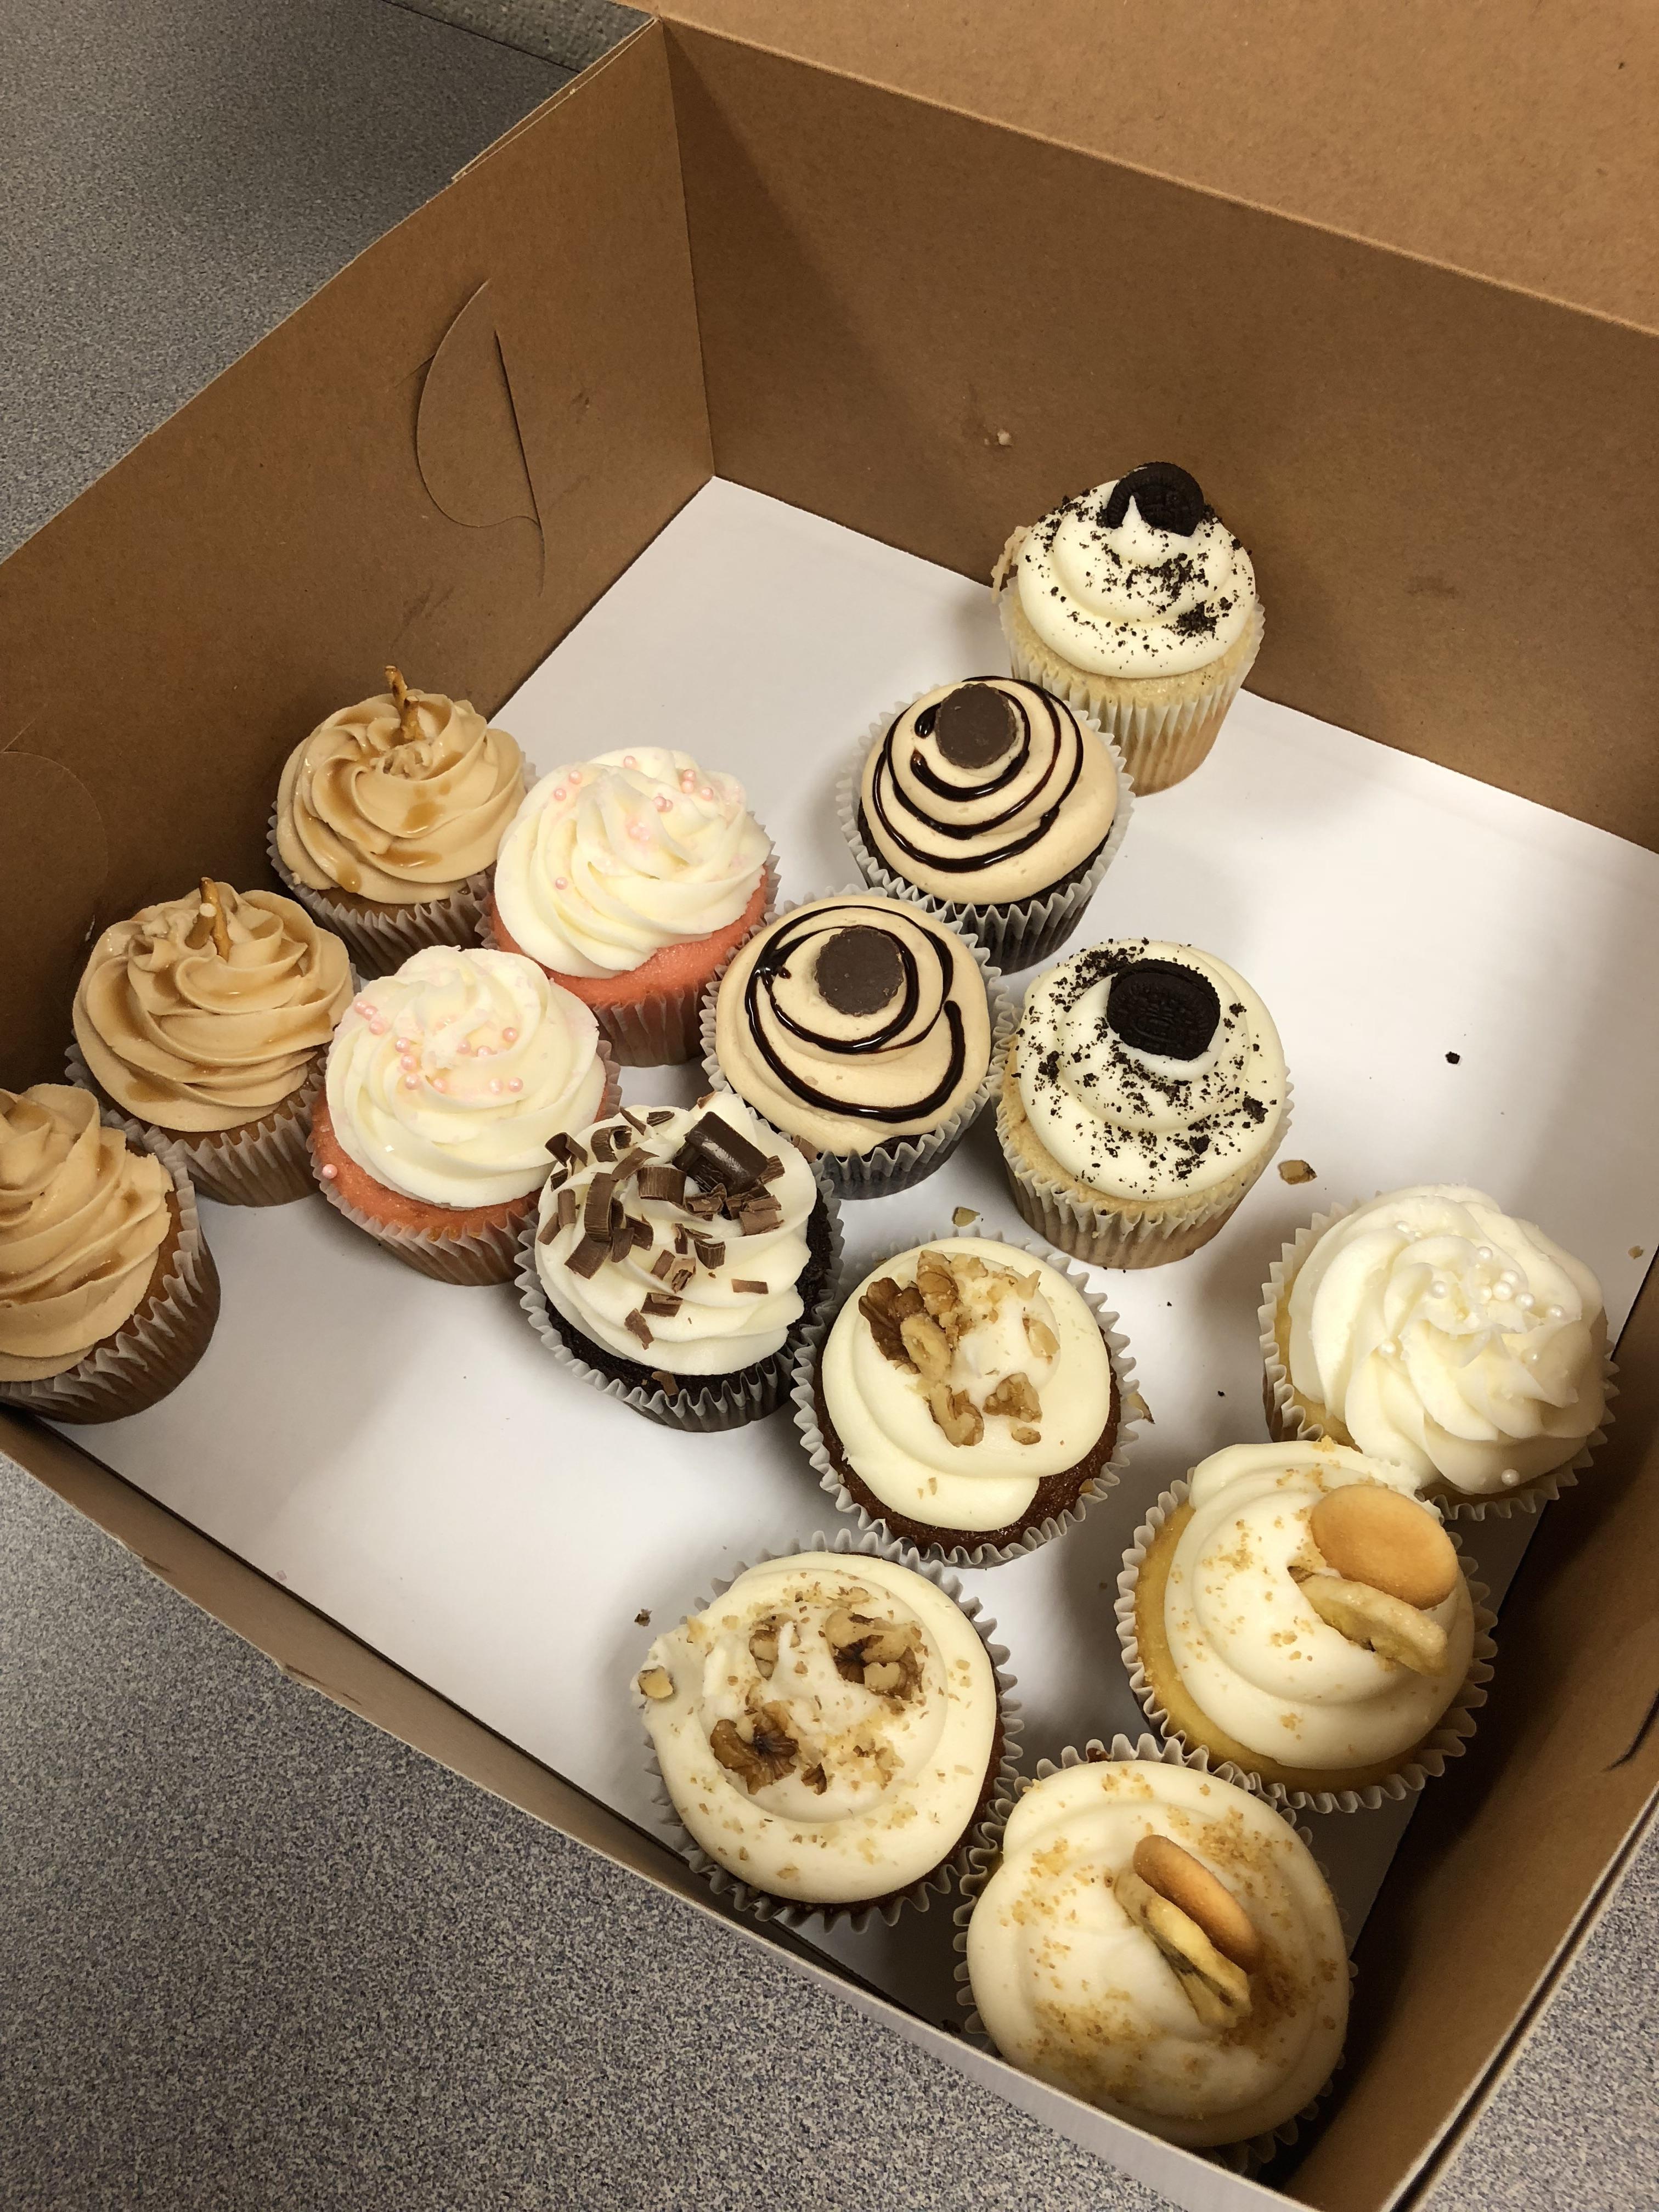 Cupcakes donated to teachers at Menominee.